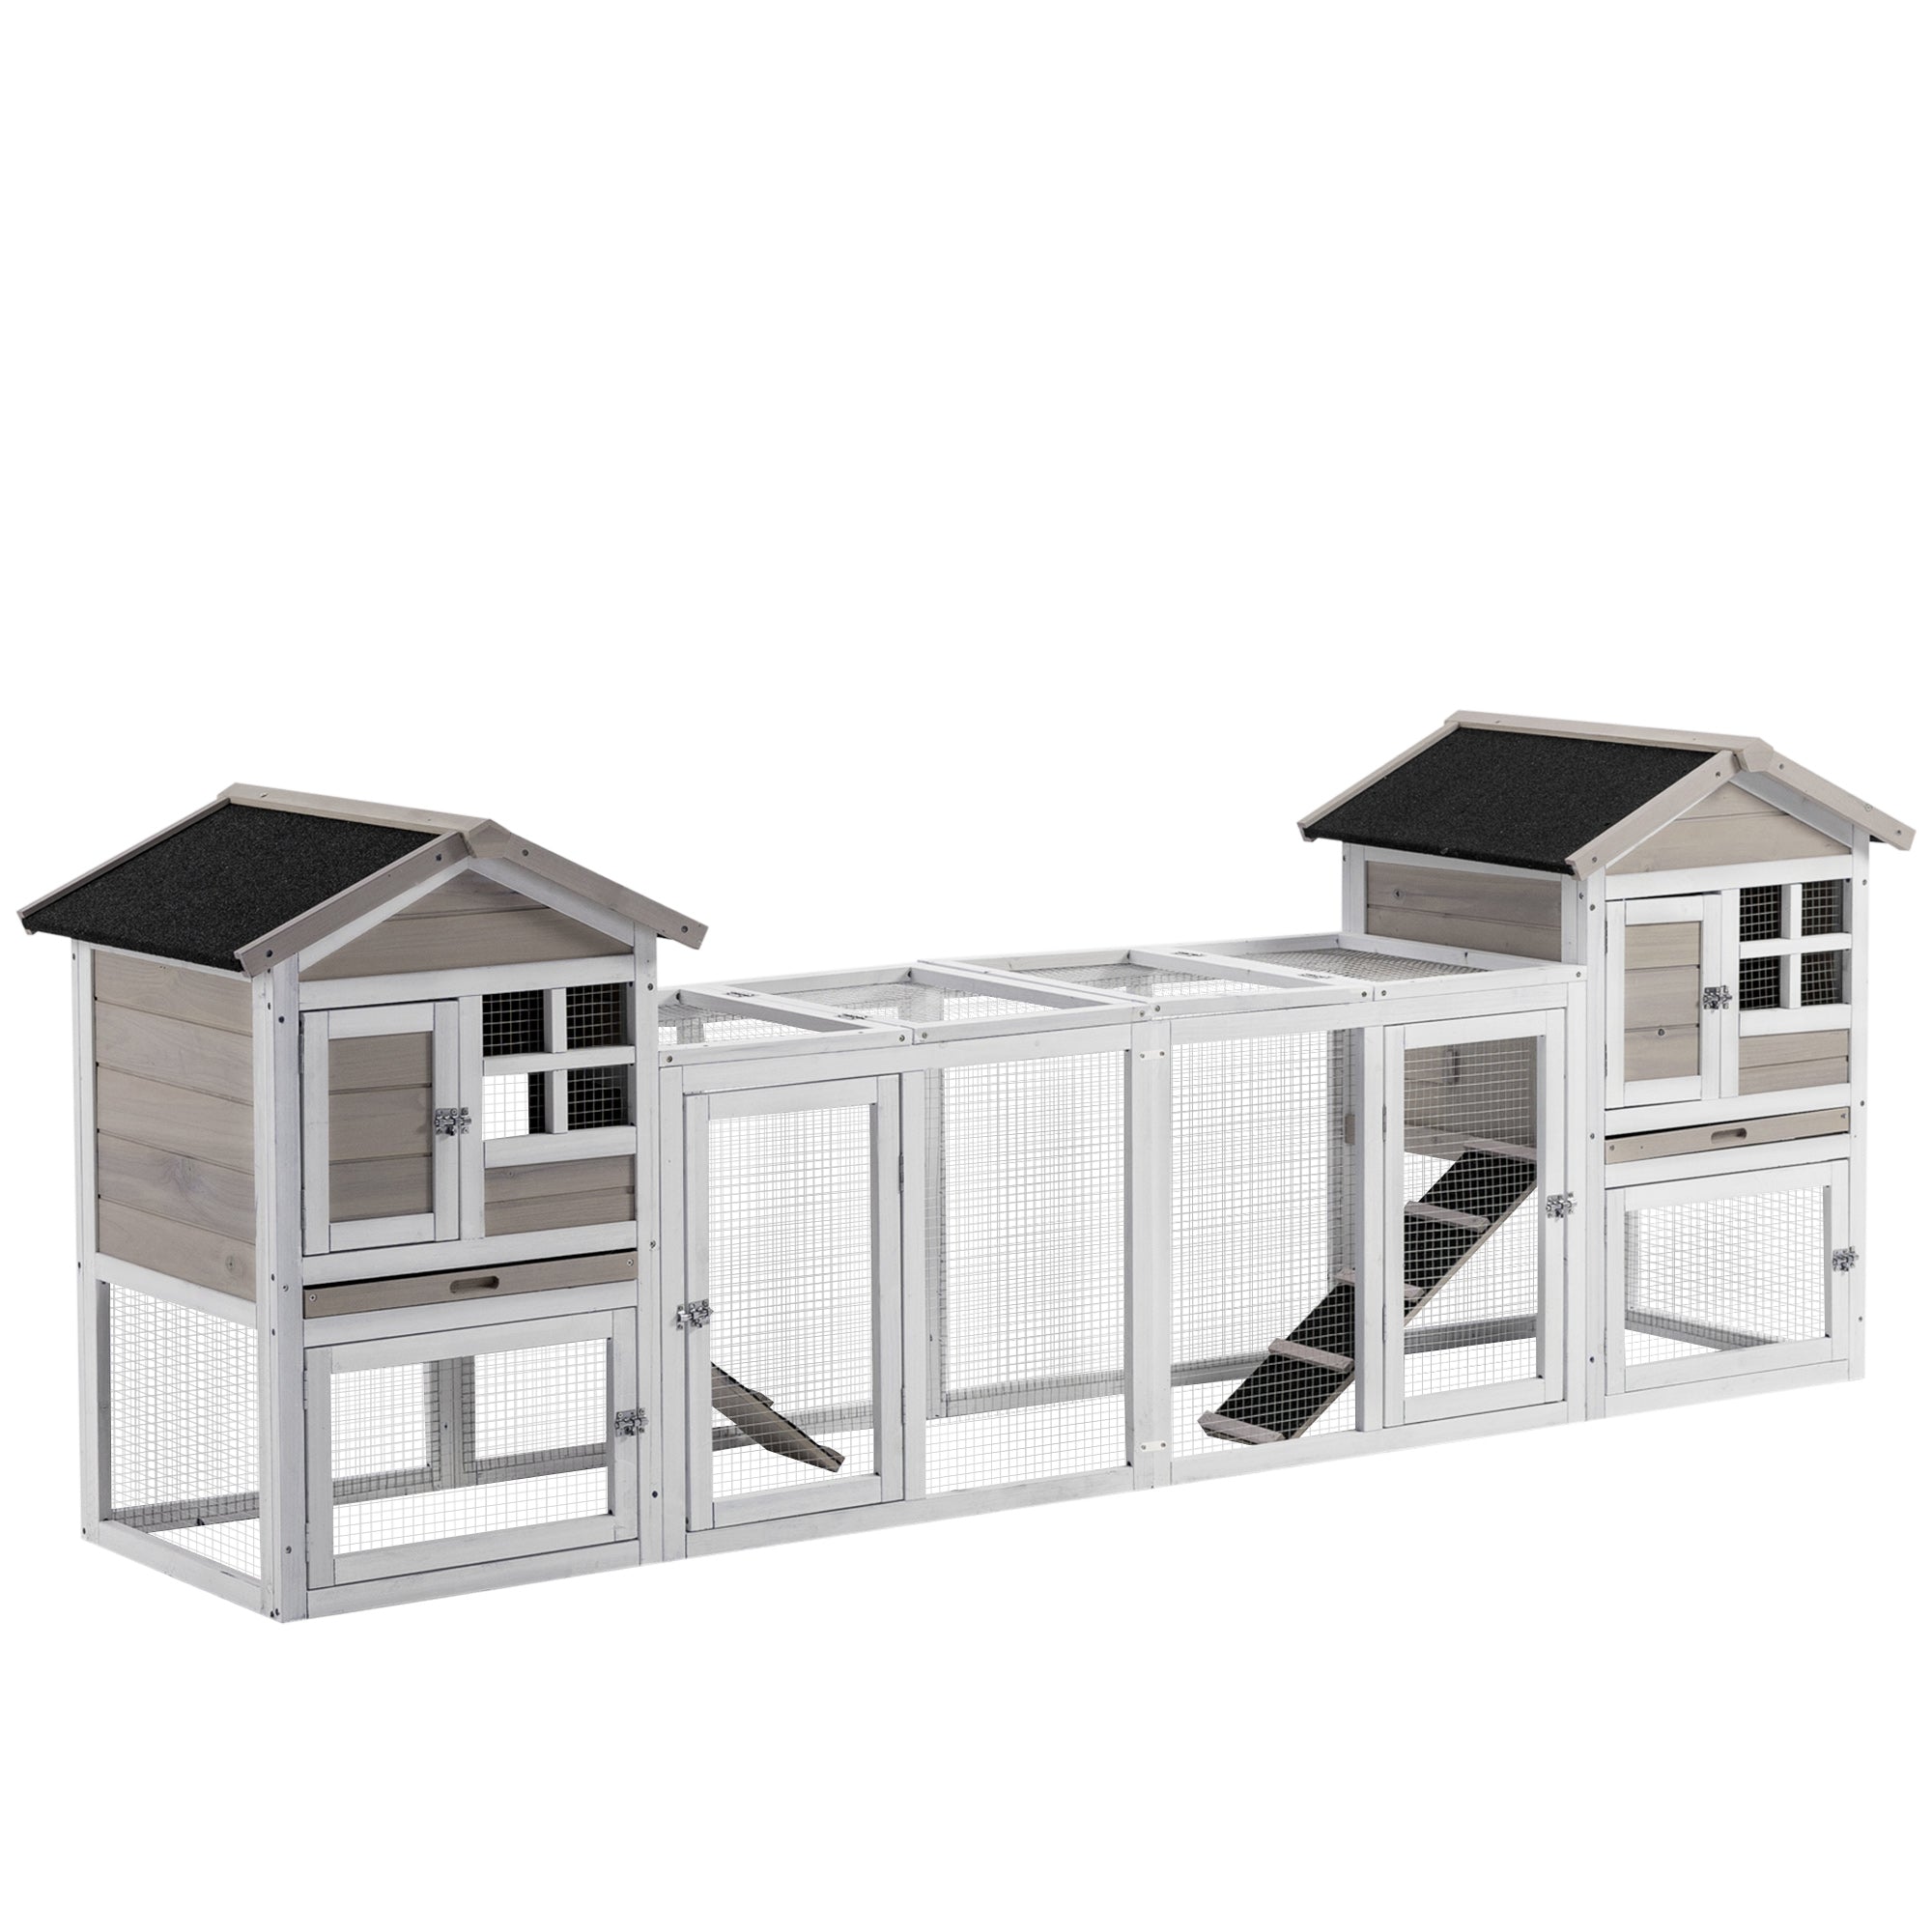 2 in 1 Rabbit Hutch Outdoor, Double Main House Guinea Pig Hutch, Bunny Run, Wooden Small Animal House with Run Box, Slide-out Tray, Ramp, 259 x 64 x 92cm, Grey, PawHut,